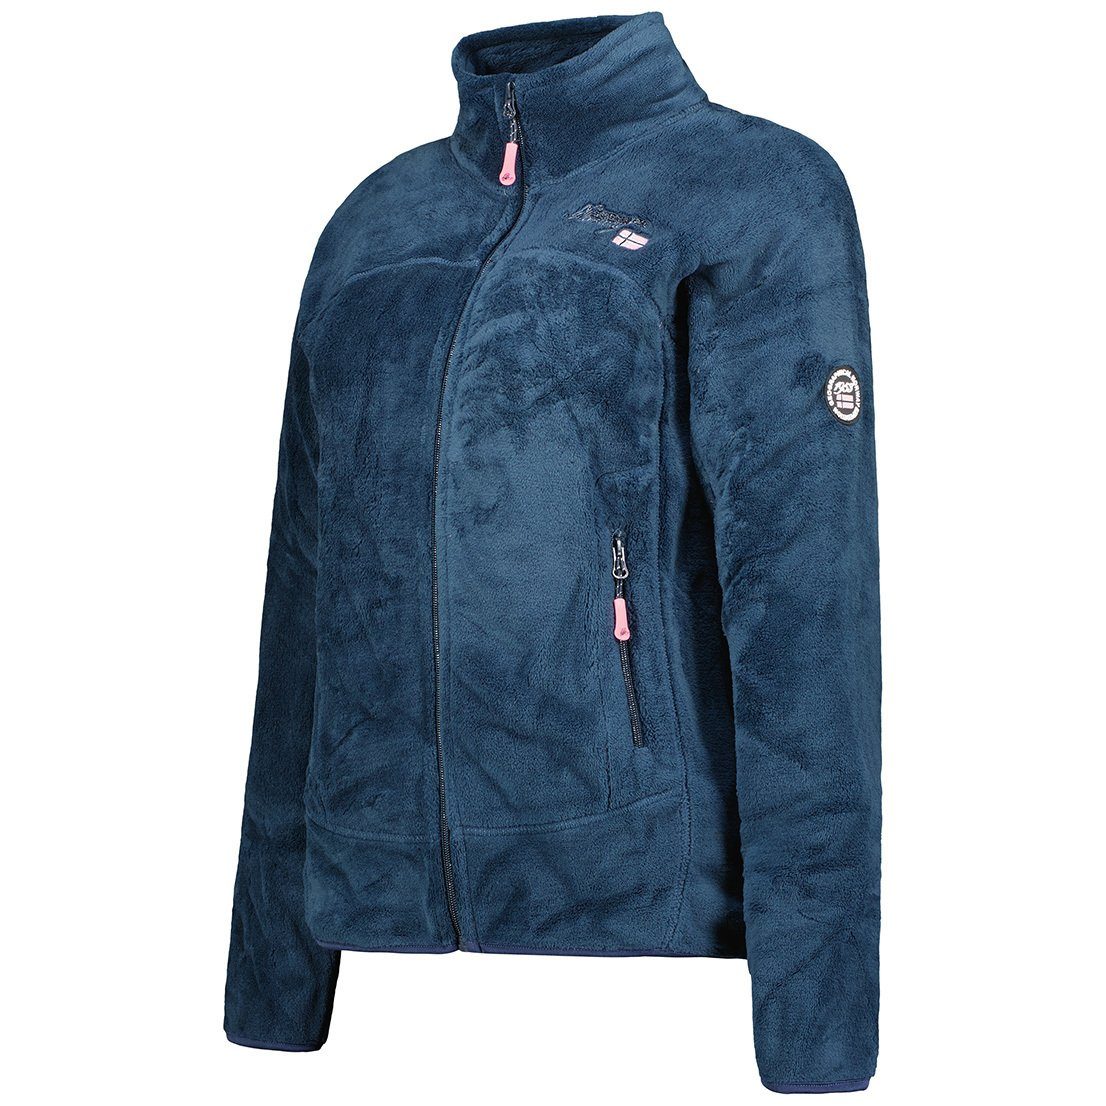 Geographical Norway Fleecejacke LADY QUES Blau - Navy / Pink